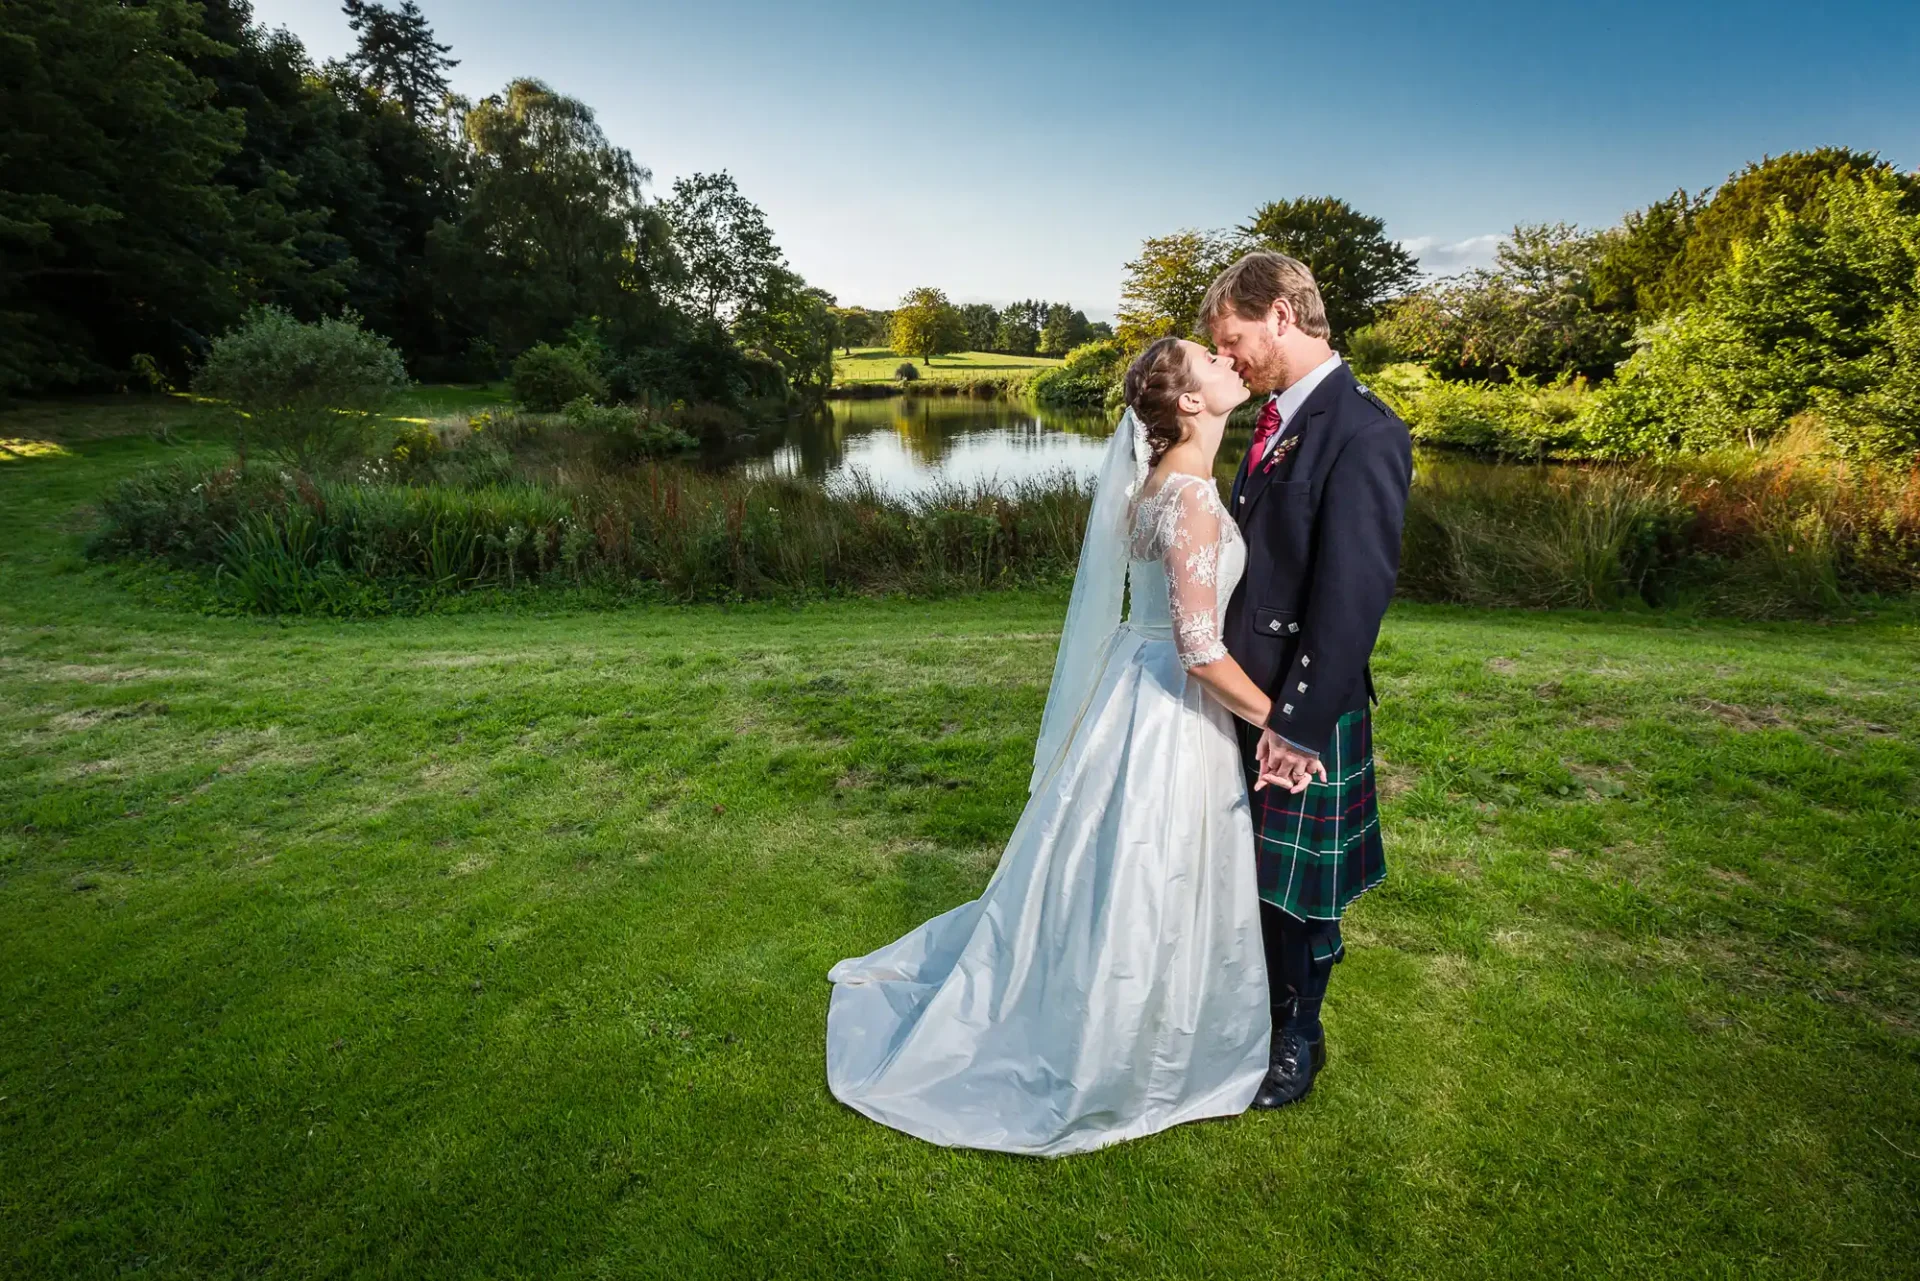 A newlywed couple embraces on a grassy field beside a pond, with the groom in a kilt and the bride in a white gown, surrounded by lush greenery under a clear sky.